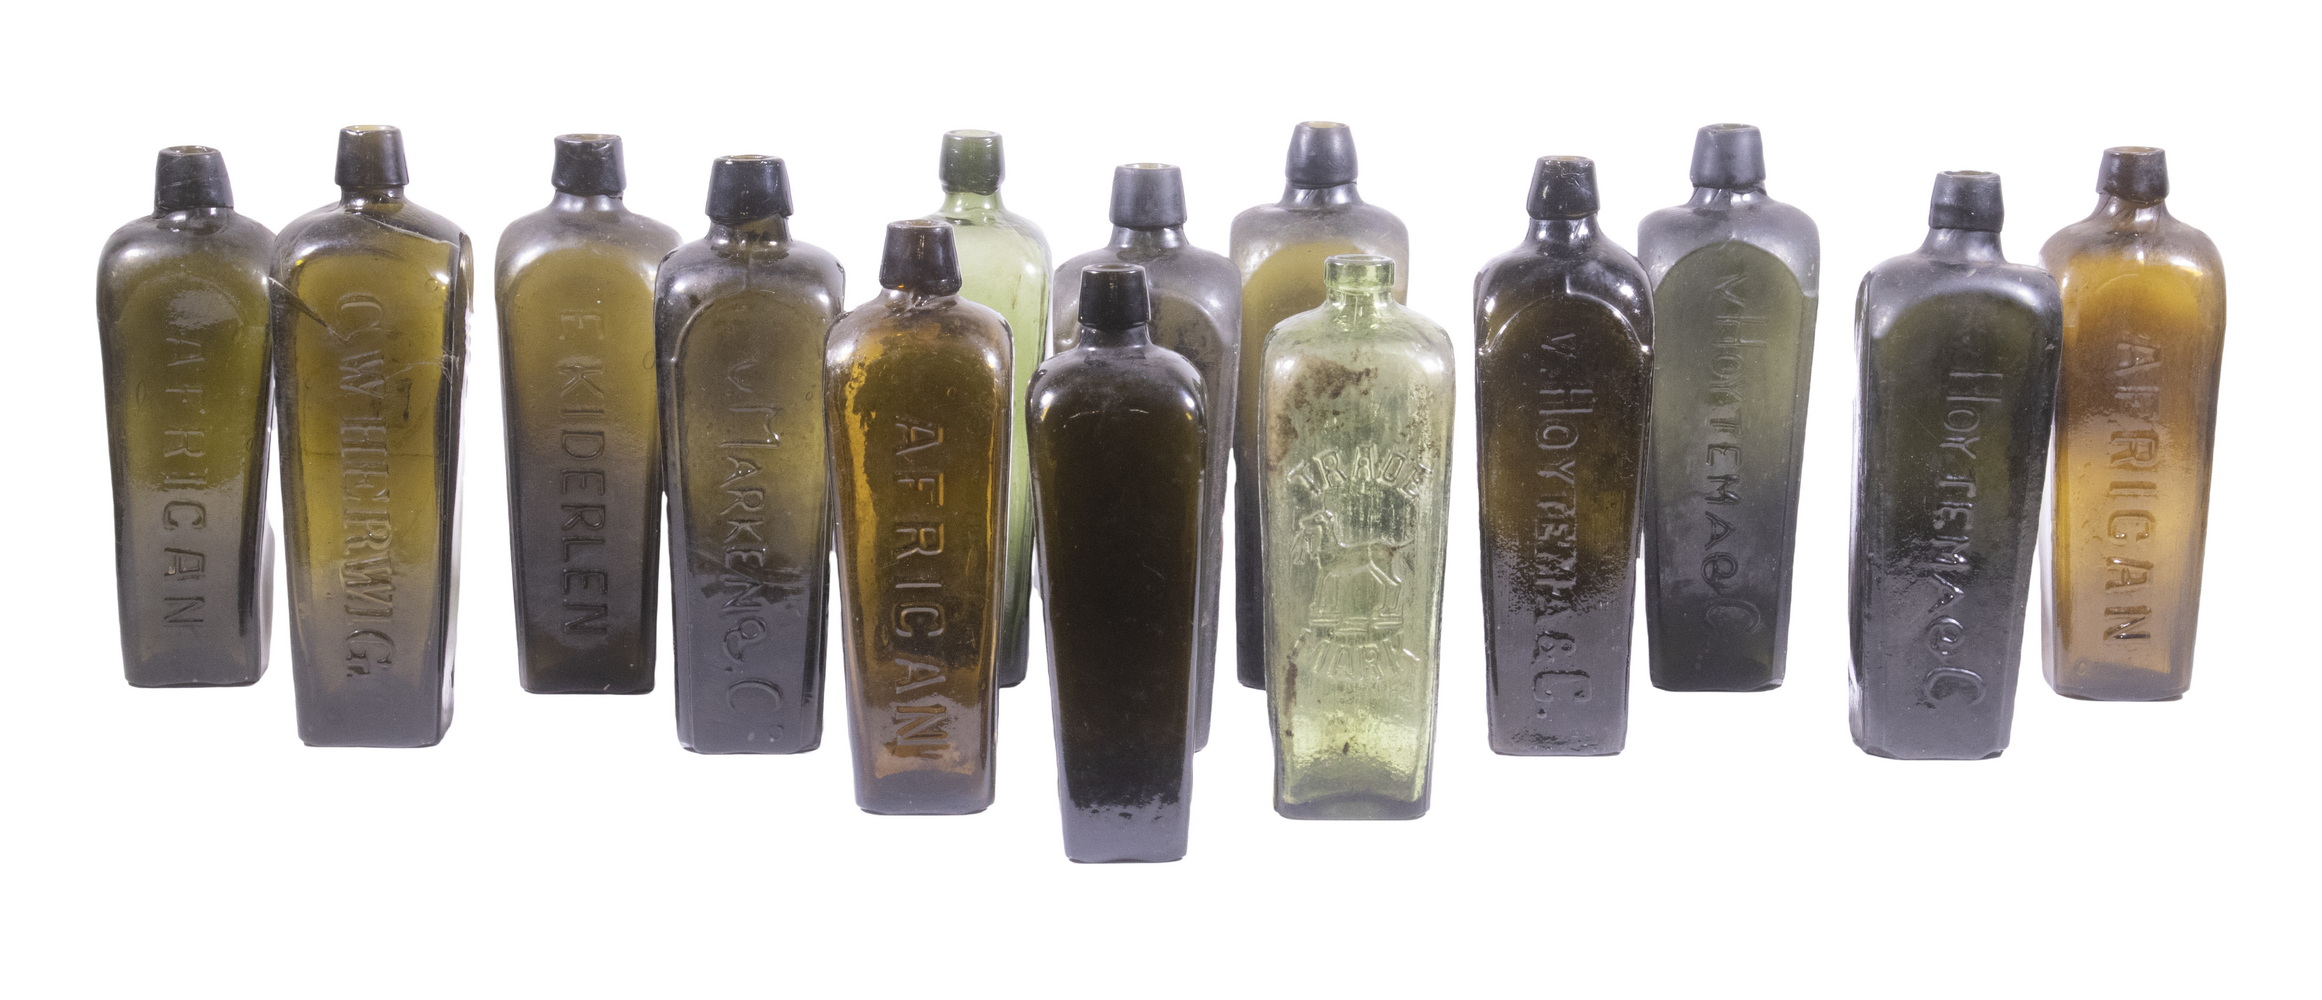 EARLY CASE GIN BOTTLE COLLECTION 3b66f2